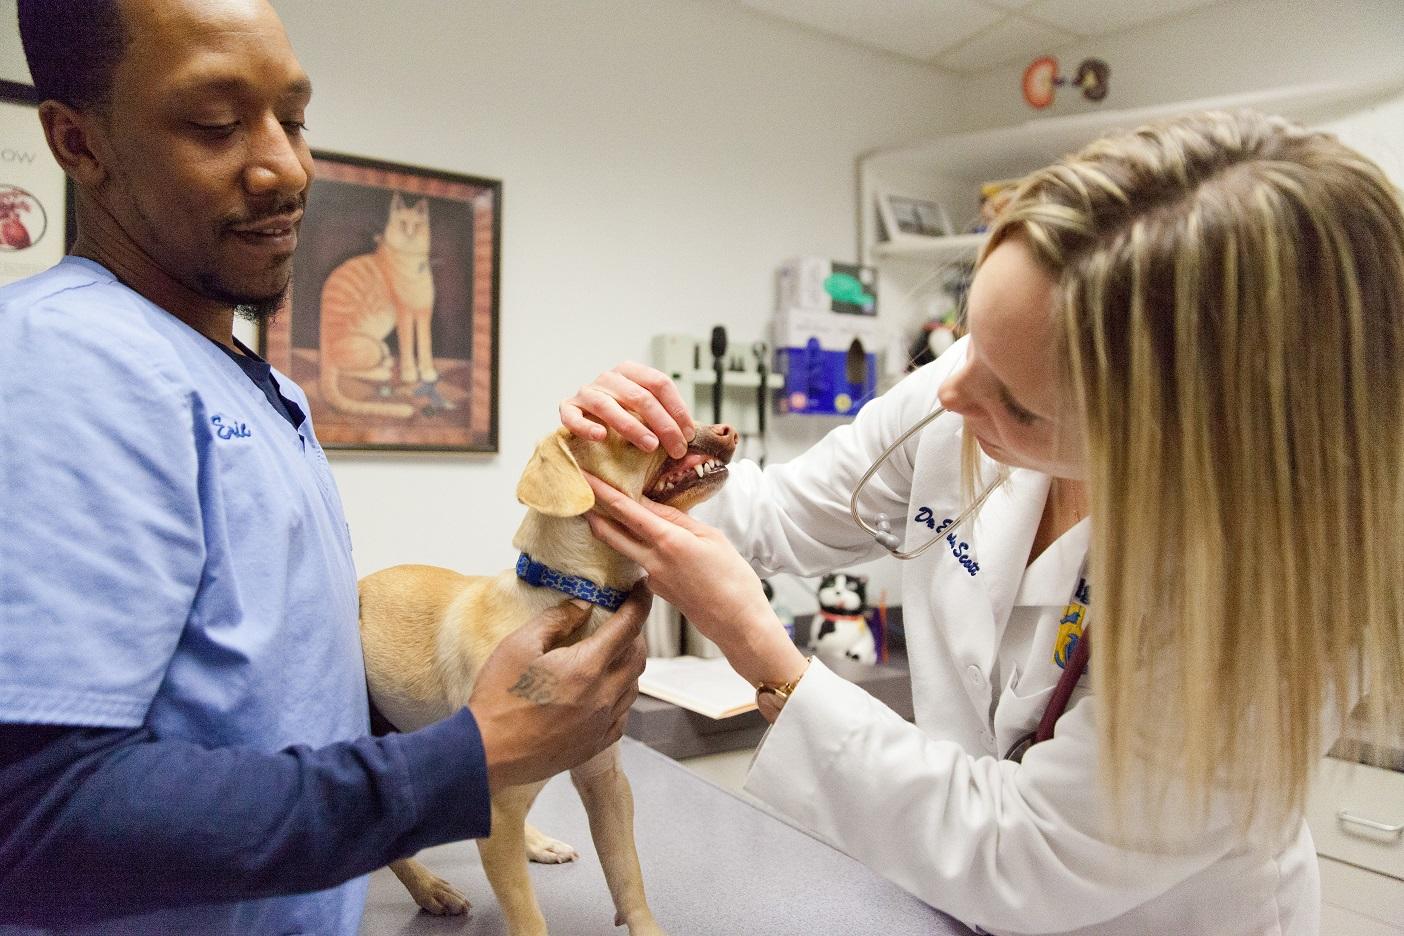 Keeping your pet’s teeth and gums clean and healthy is one of the best things you can do as a pet parent. Here, Dr. Scott checks this dog’s oral cavity for signs of dental disease.